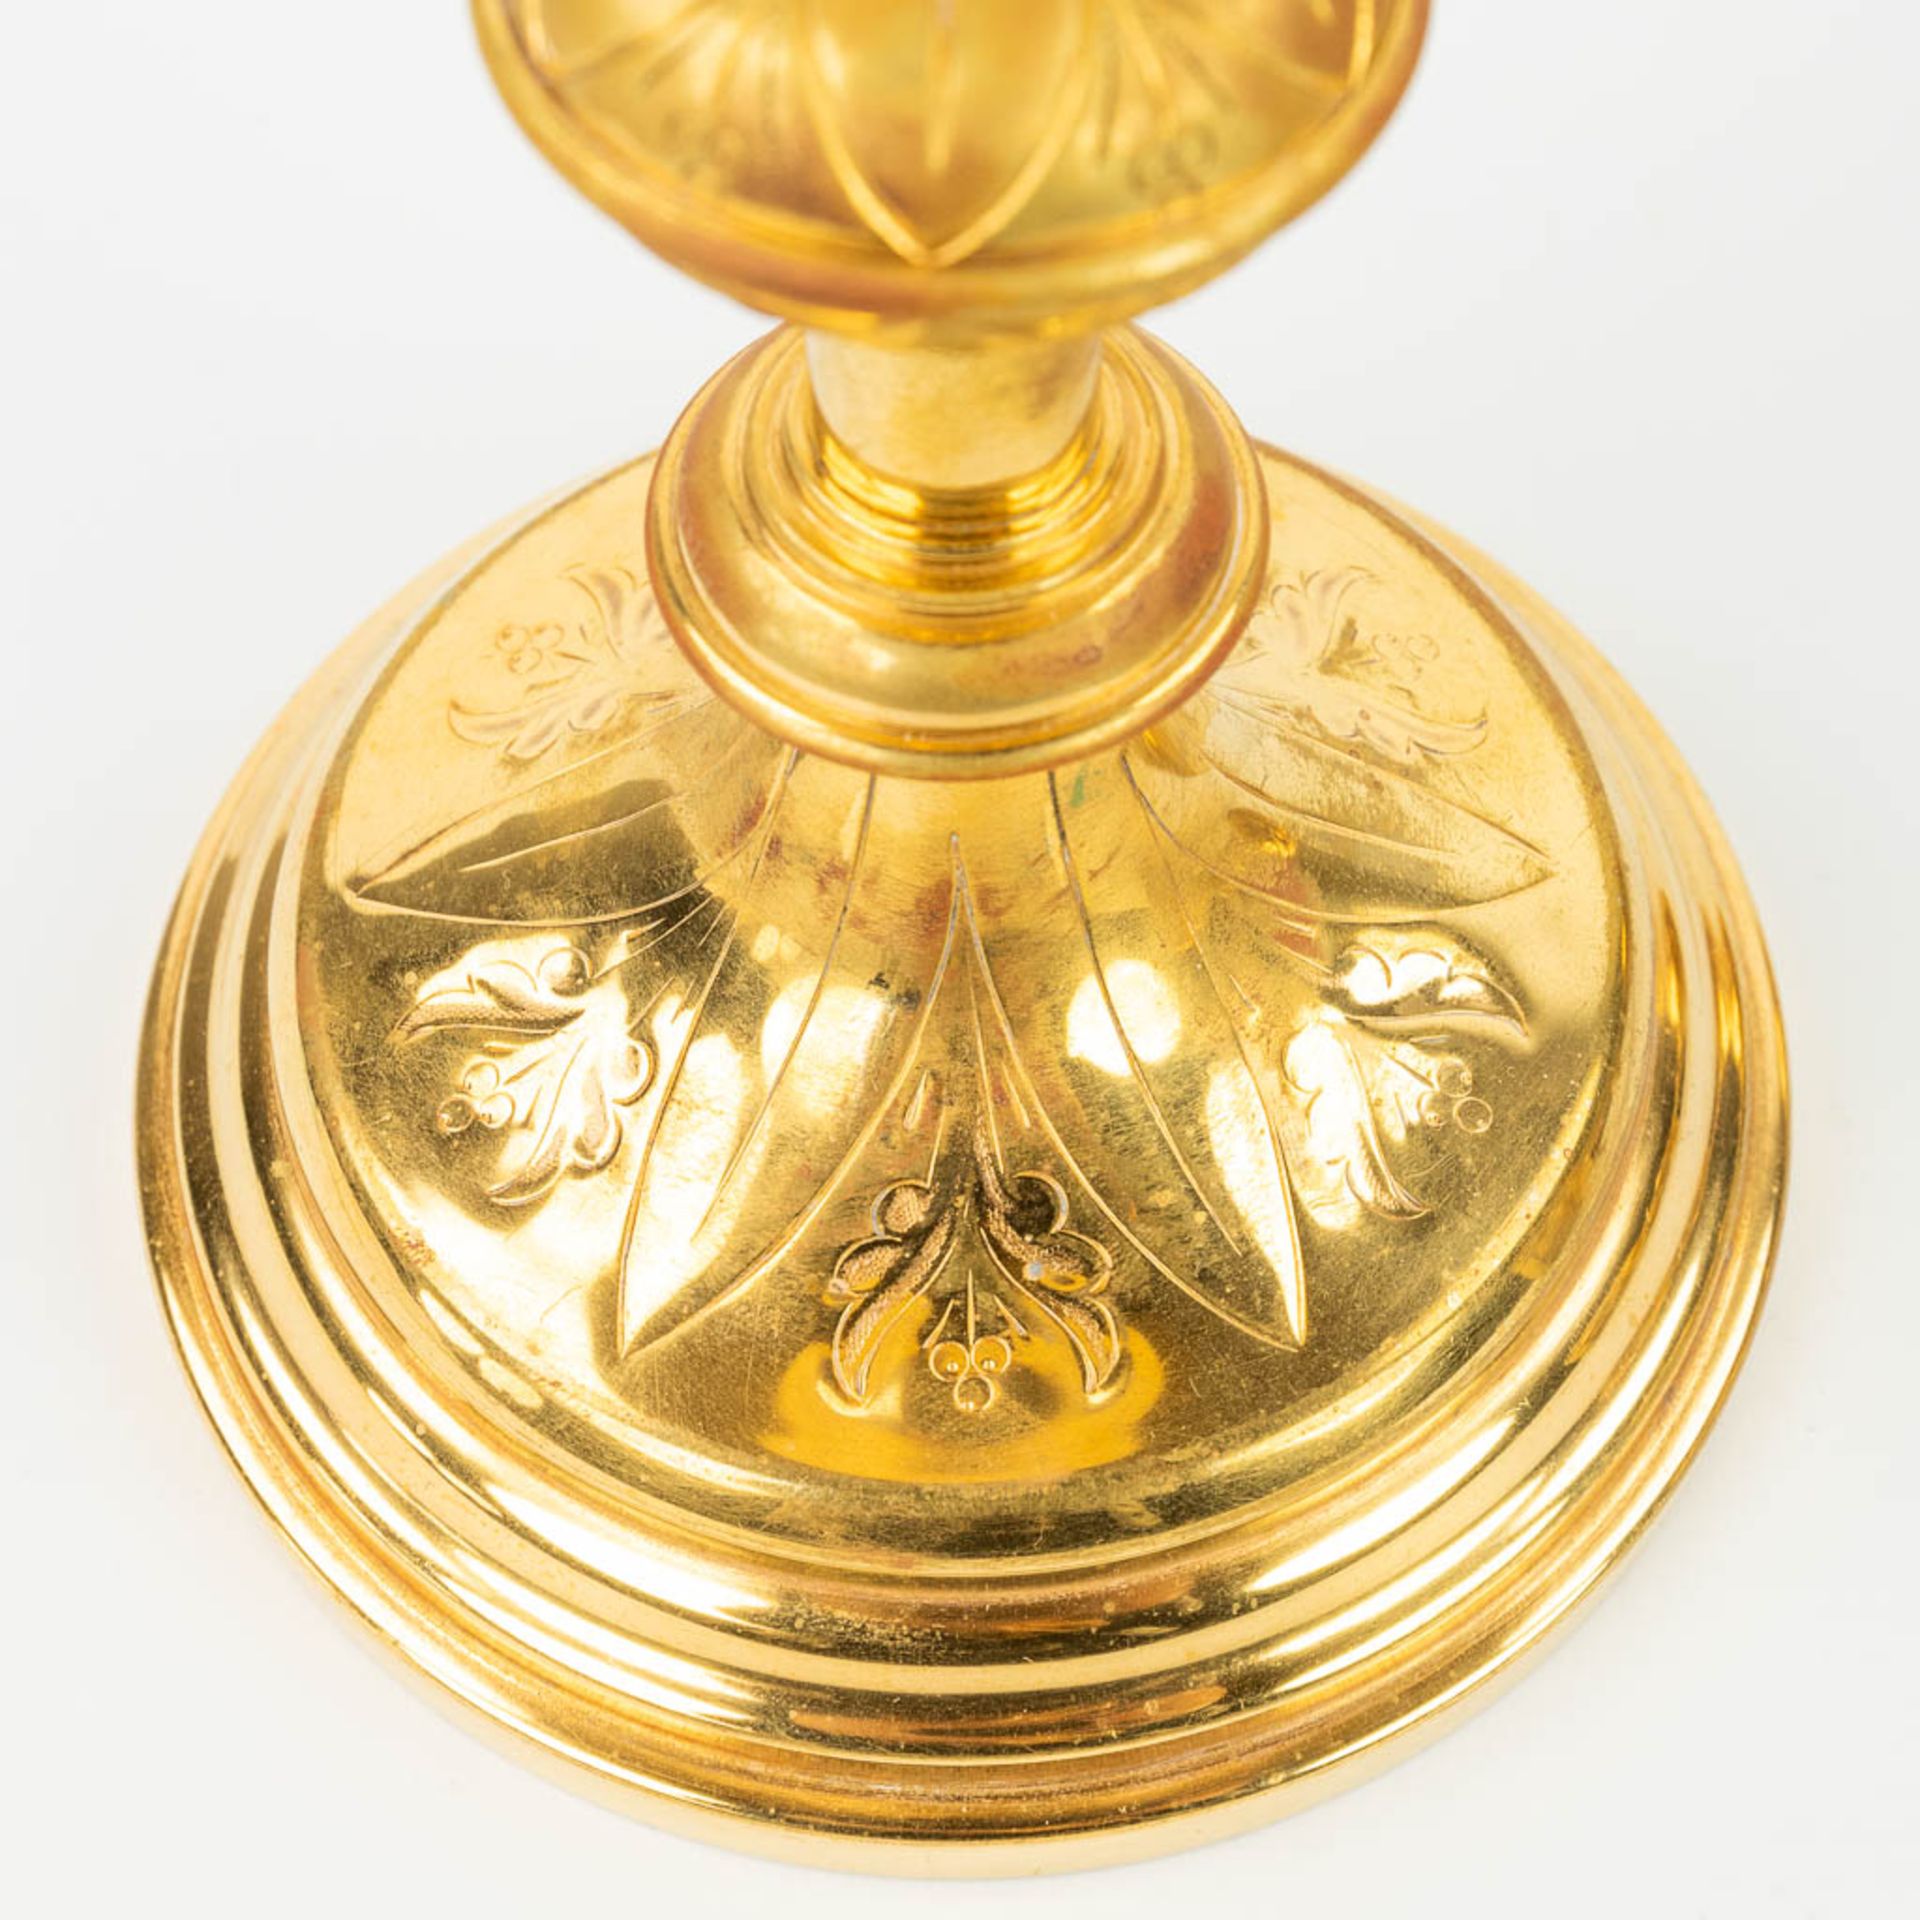 A collection of 4 large ciboria and a chalice made of silver and gold plated metal. - Image 20 of 24